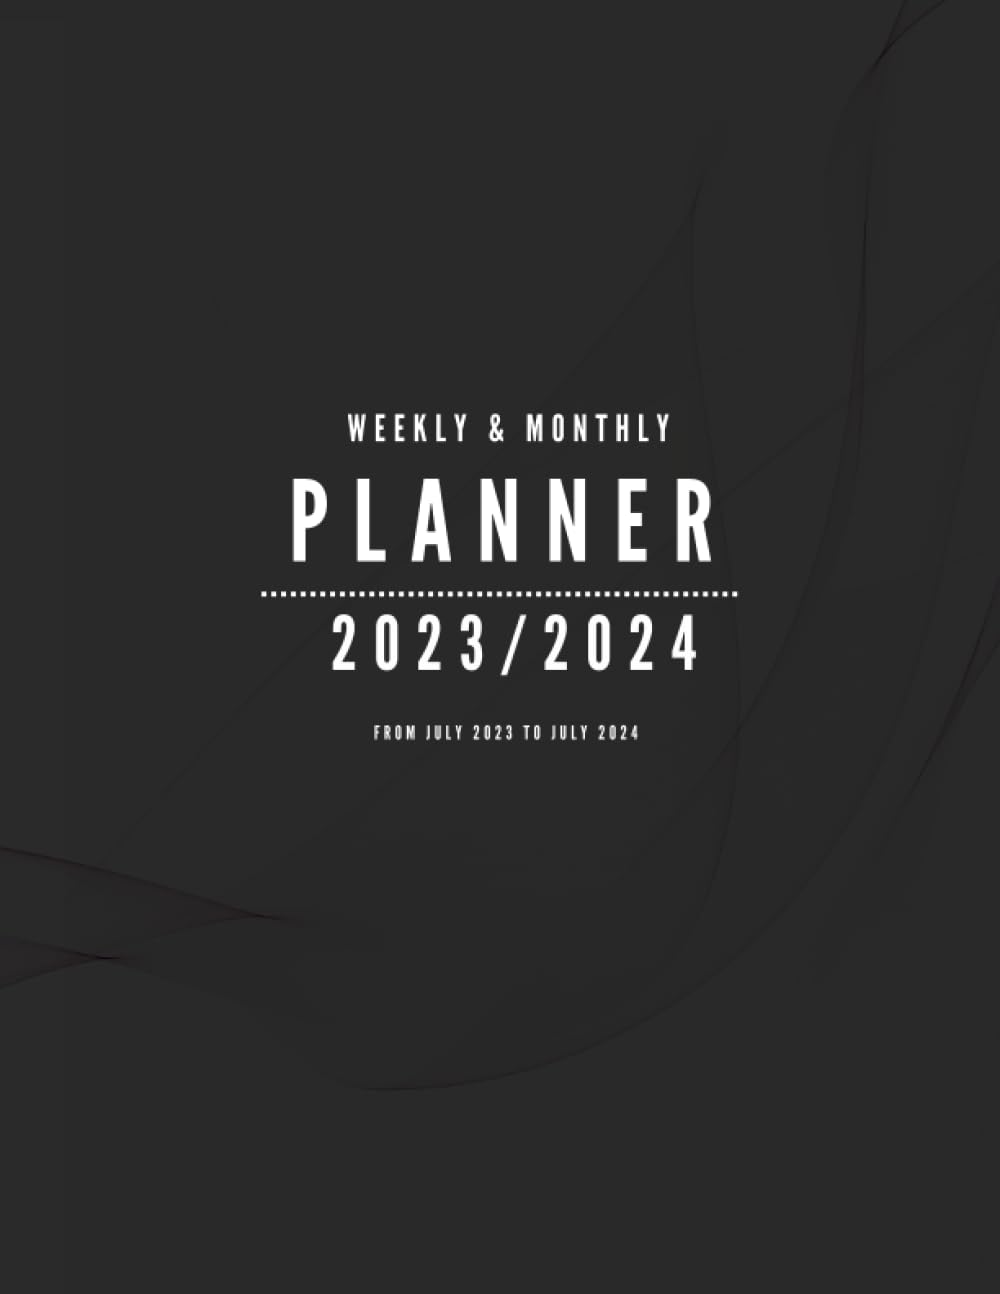 Minimalist Black Planner 2023-2024 with Weekly and Monthly Pages from July 2023 to July 2024